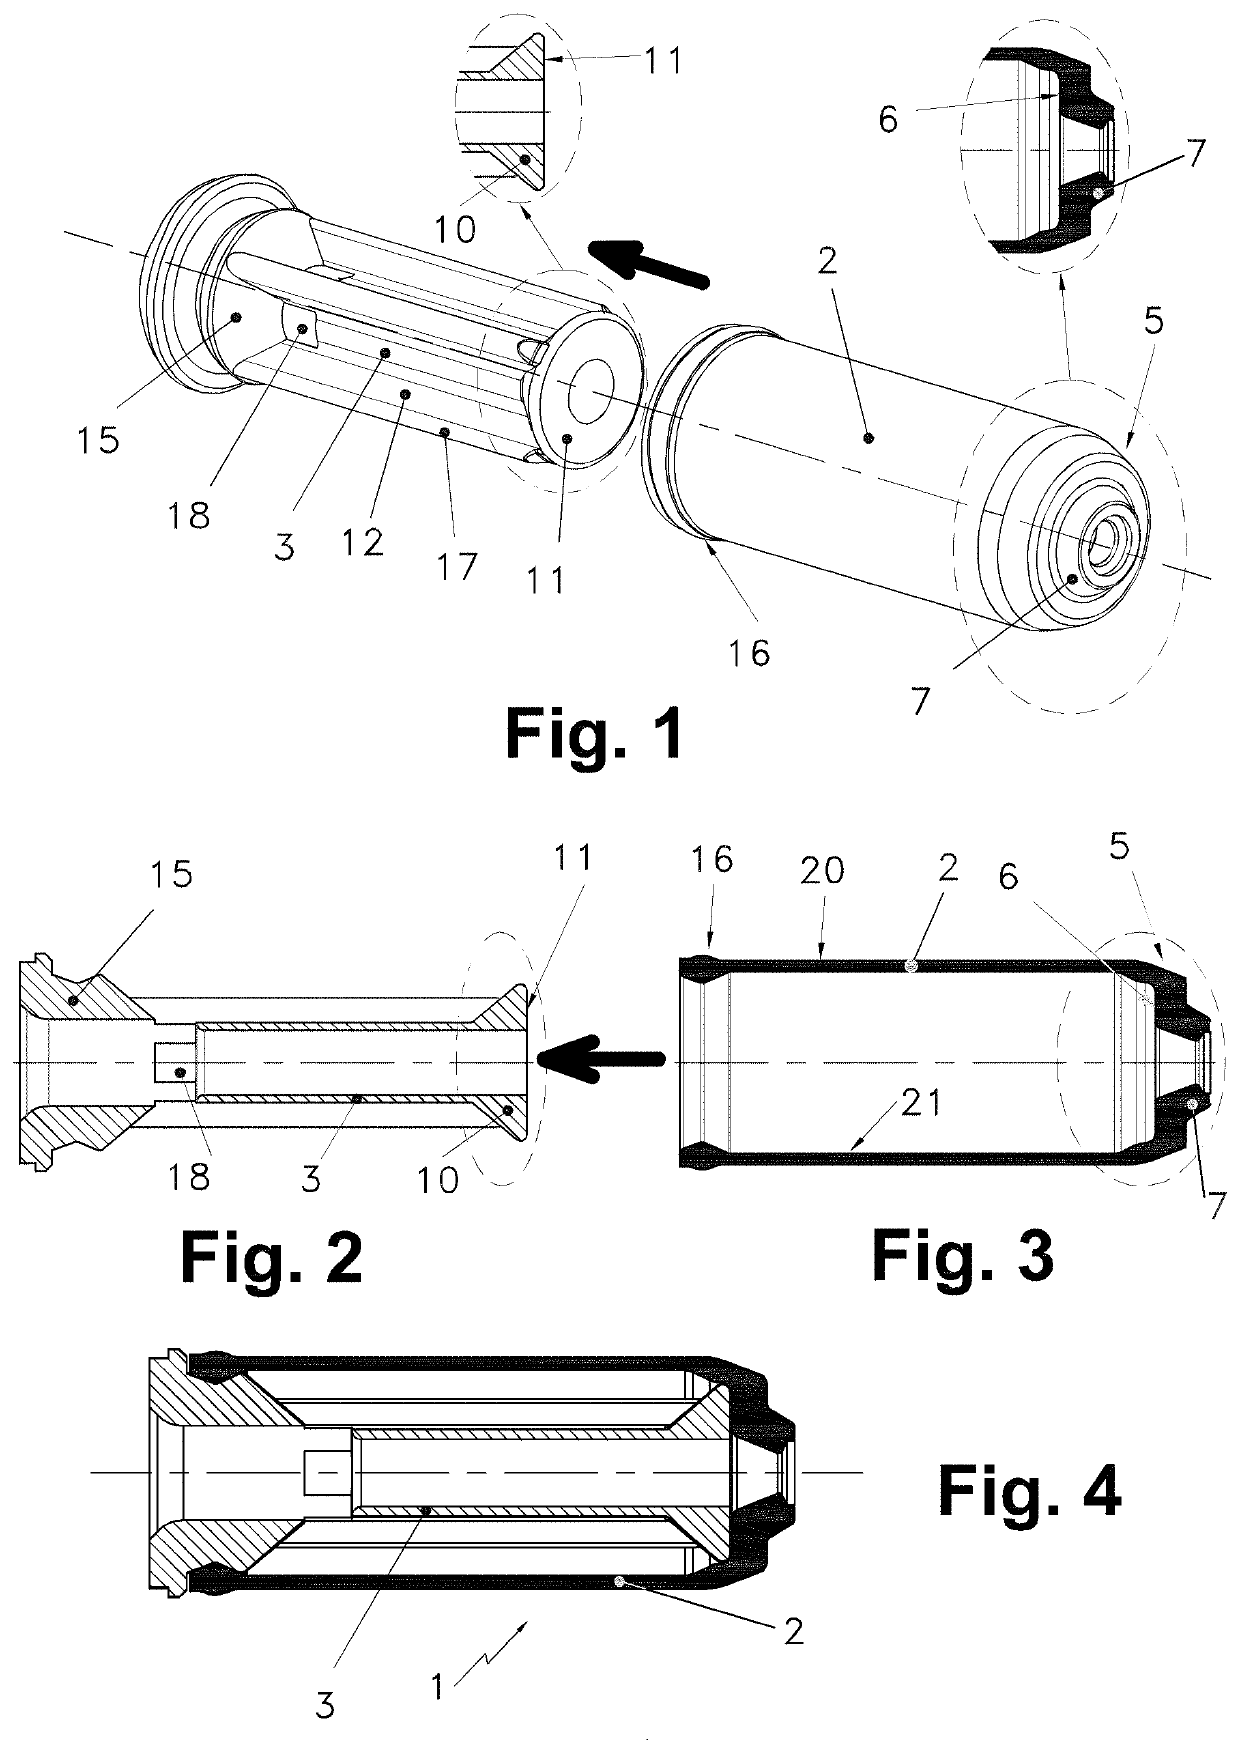 Cylindrical diaphragm assembly with reduced diameter for hidraulic shock absorbers sealed at both ends, of the type employed in self-closing furniture